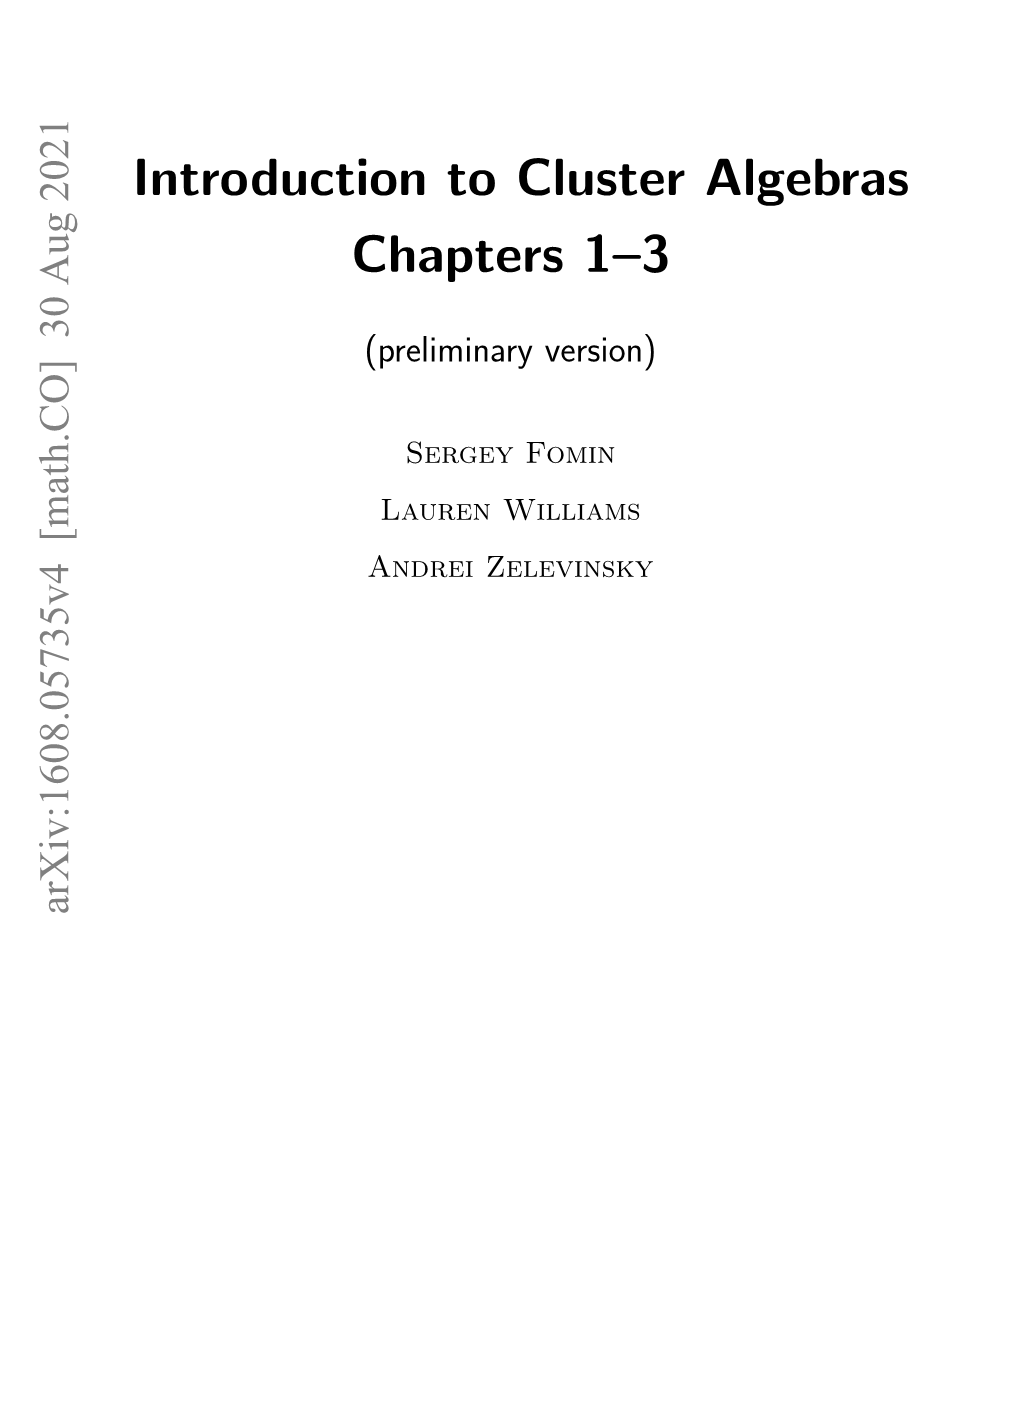 Introduction to Cluster Algebras. Chapters